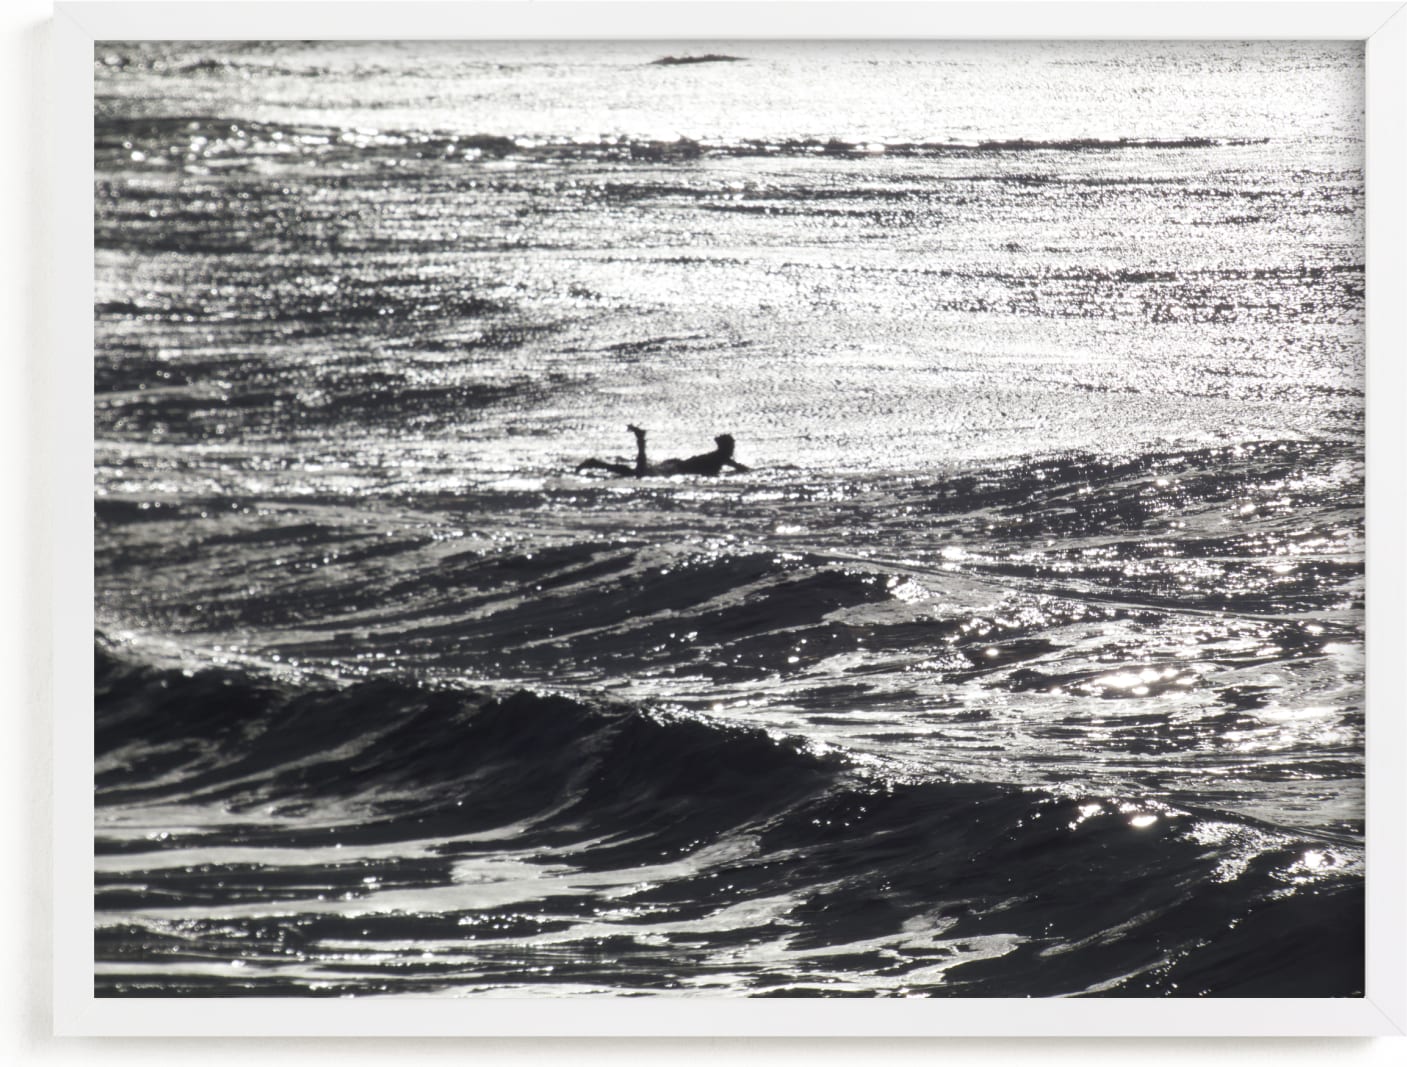 This is a black and white art by Annie Seaton called Cayucos Pier Surfer, Winter Morning Sun.